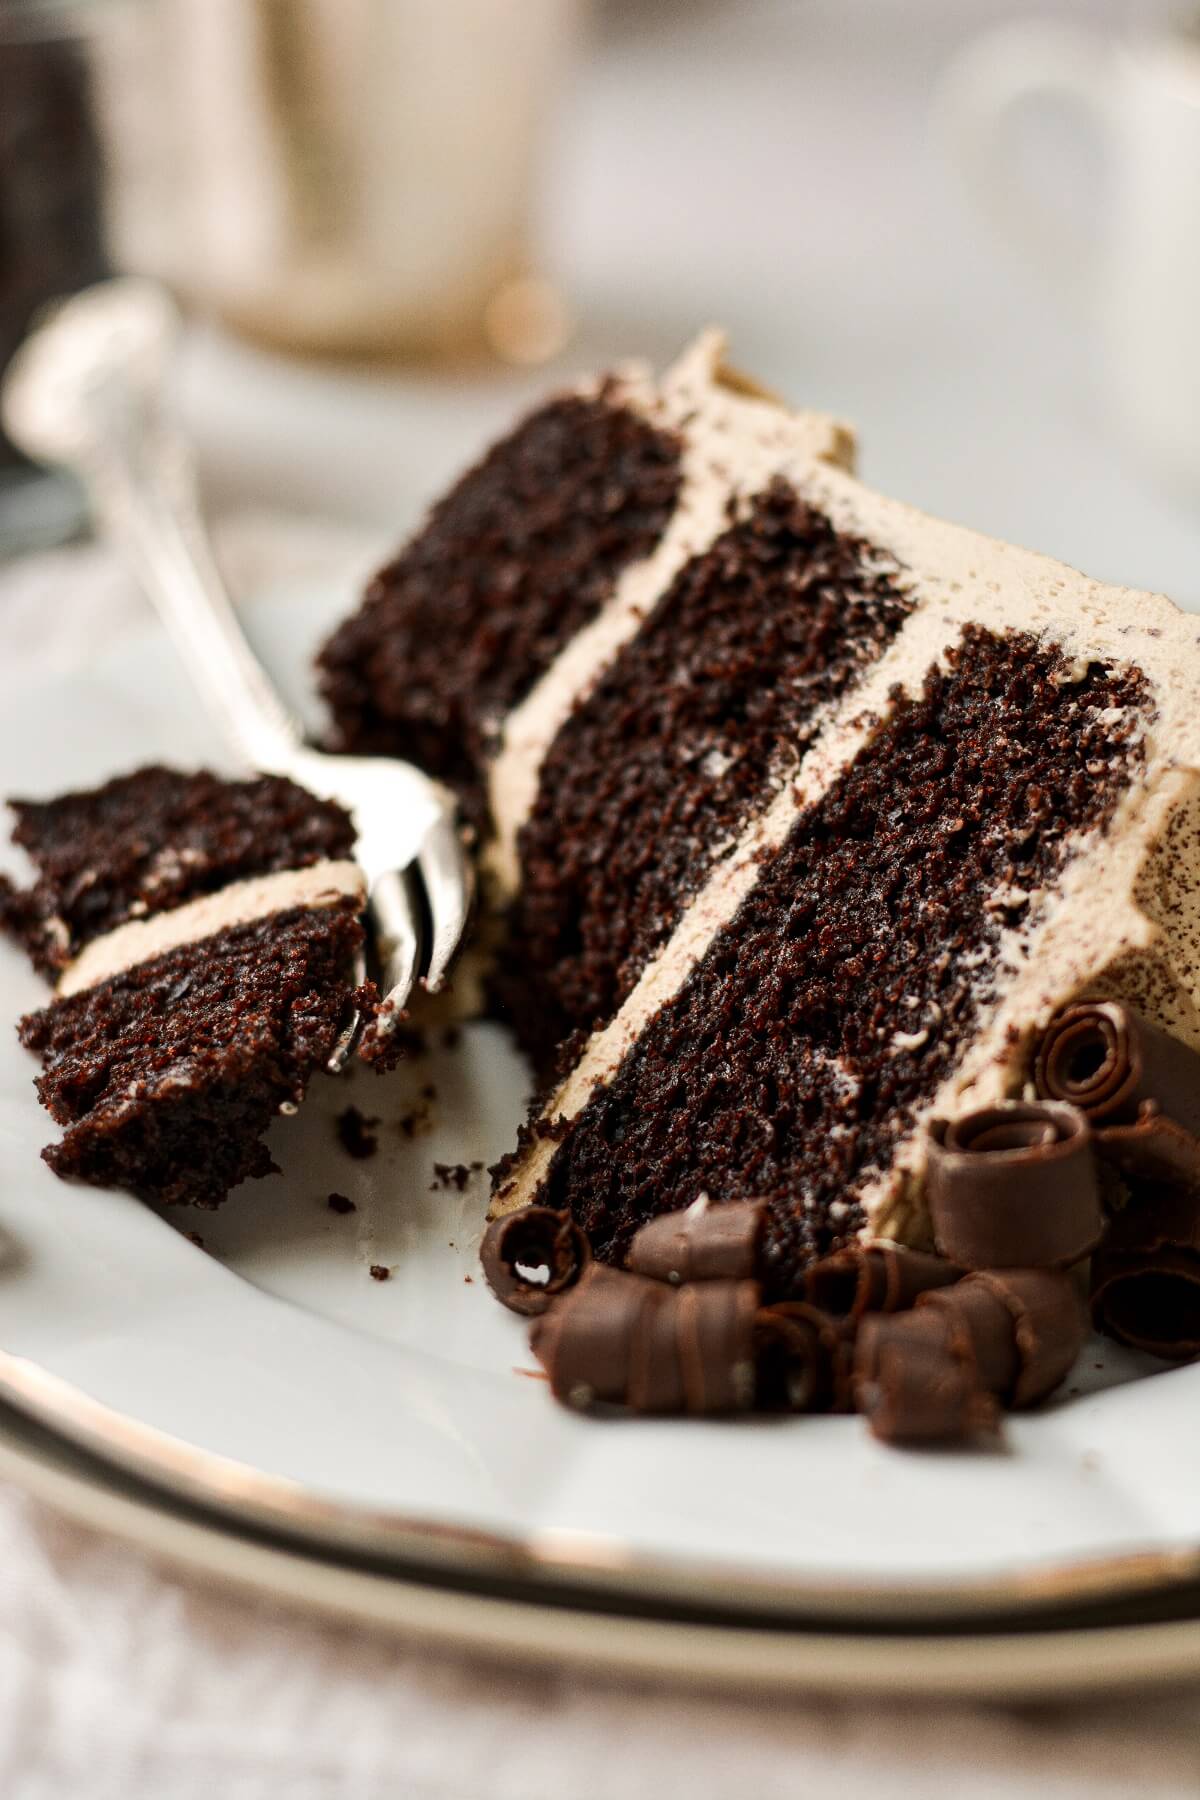 Chocolate espresso cake with coffee buttercream and chocolate curls.